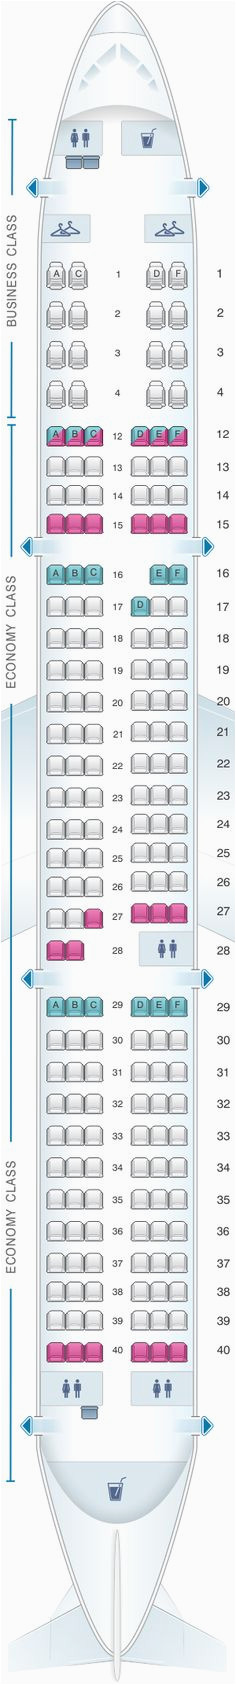 Air Canada 321 Seat Map 67 Best Airbus A321 Images In 2017 Airplanes Aircraft Airplane